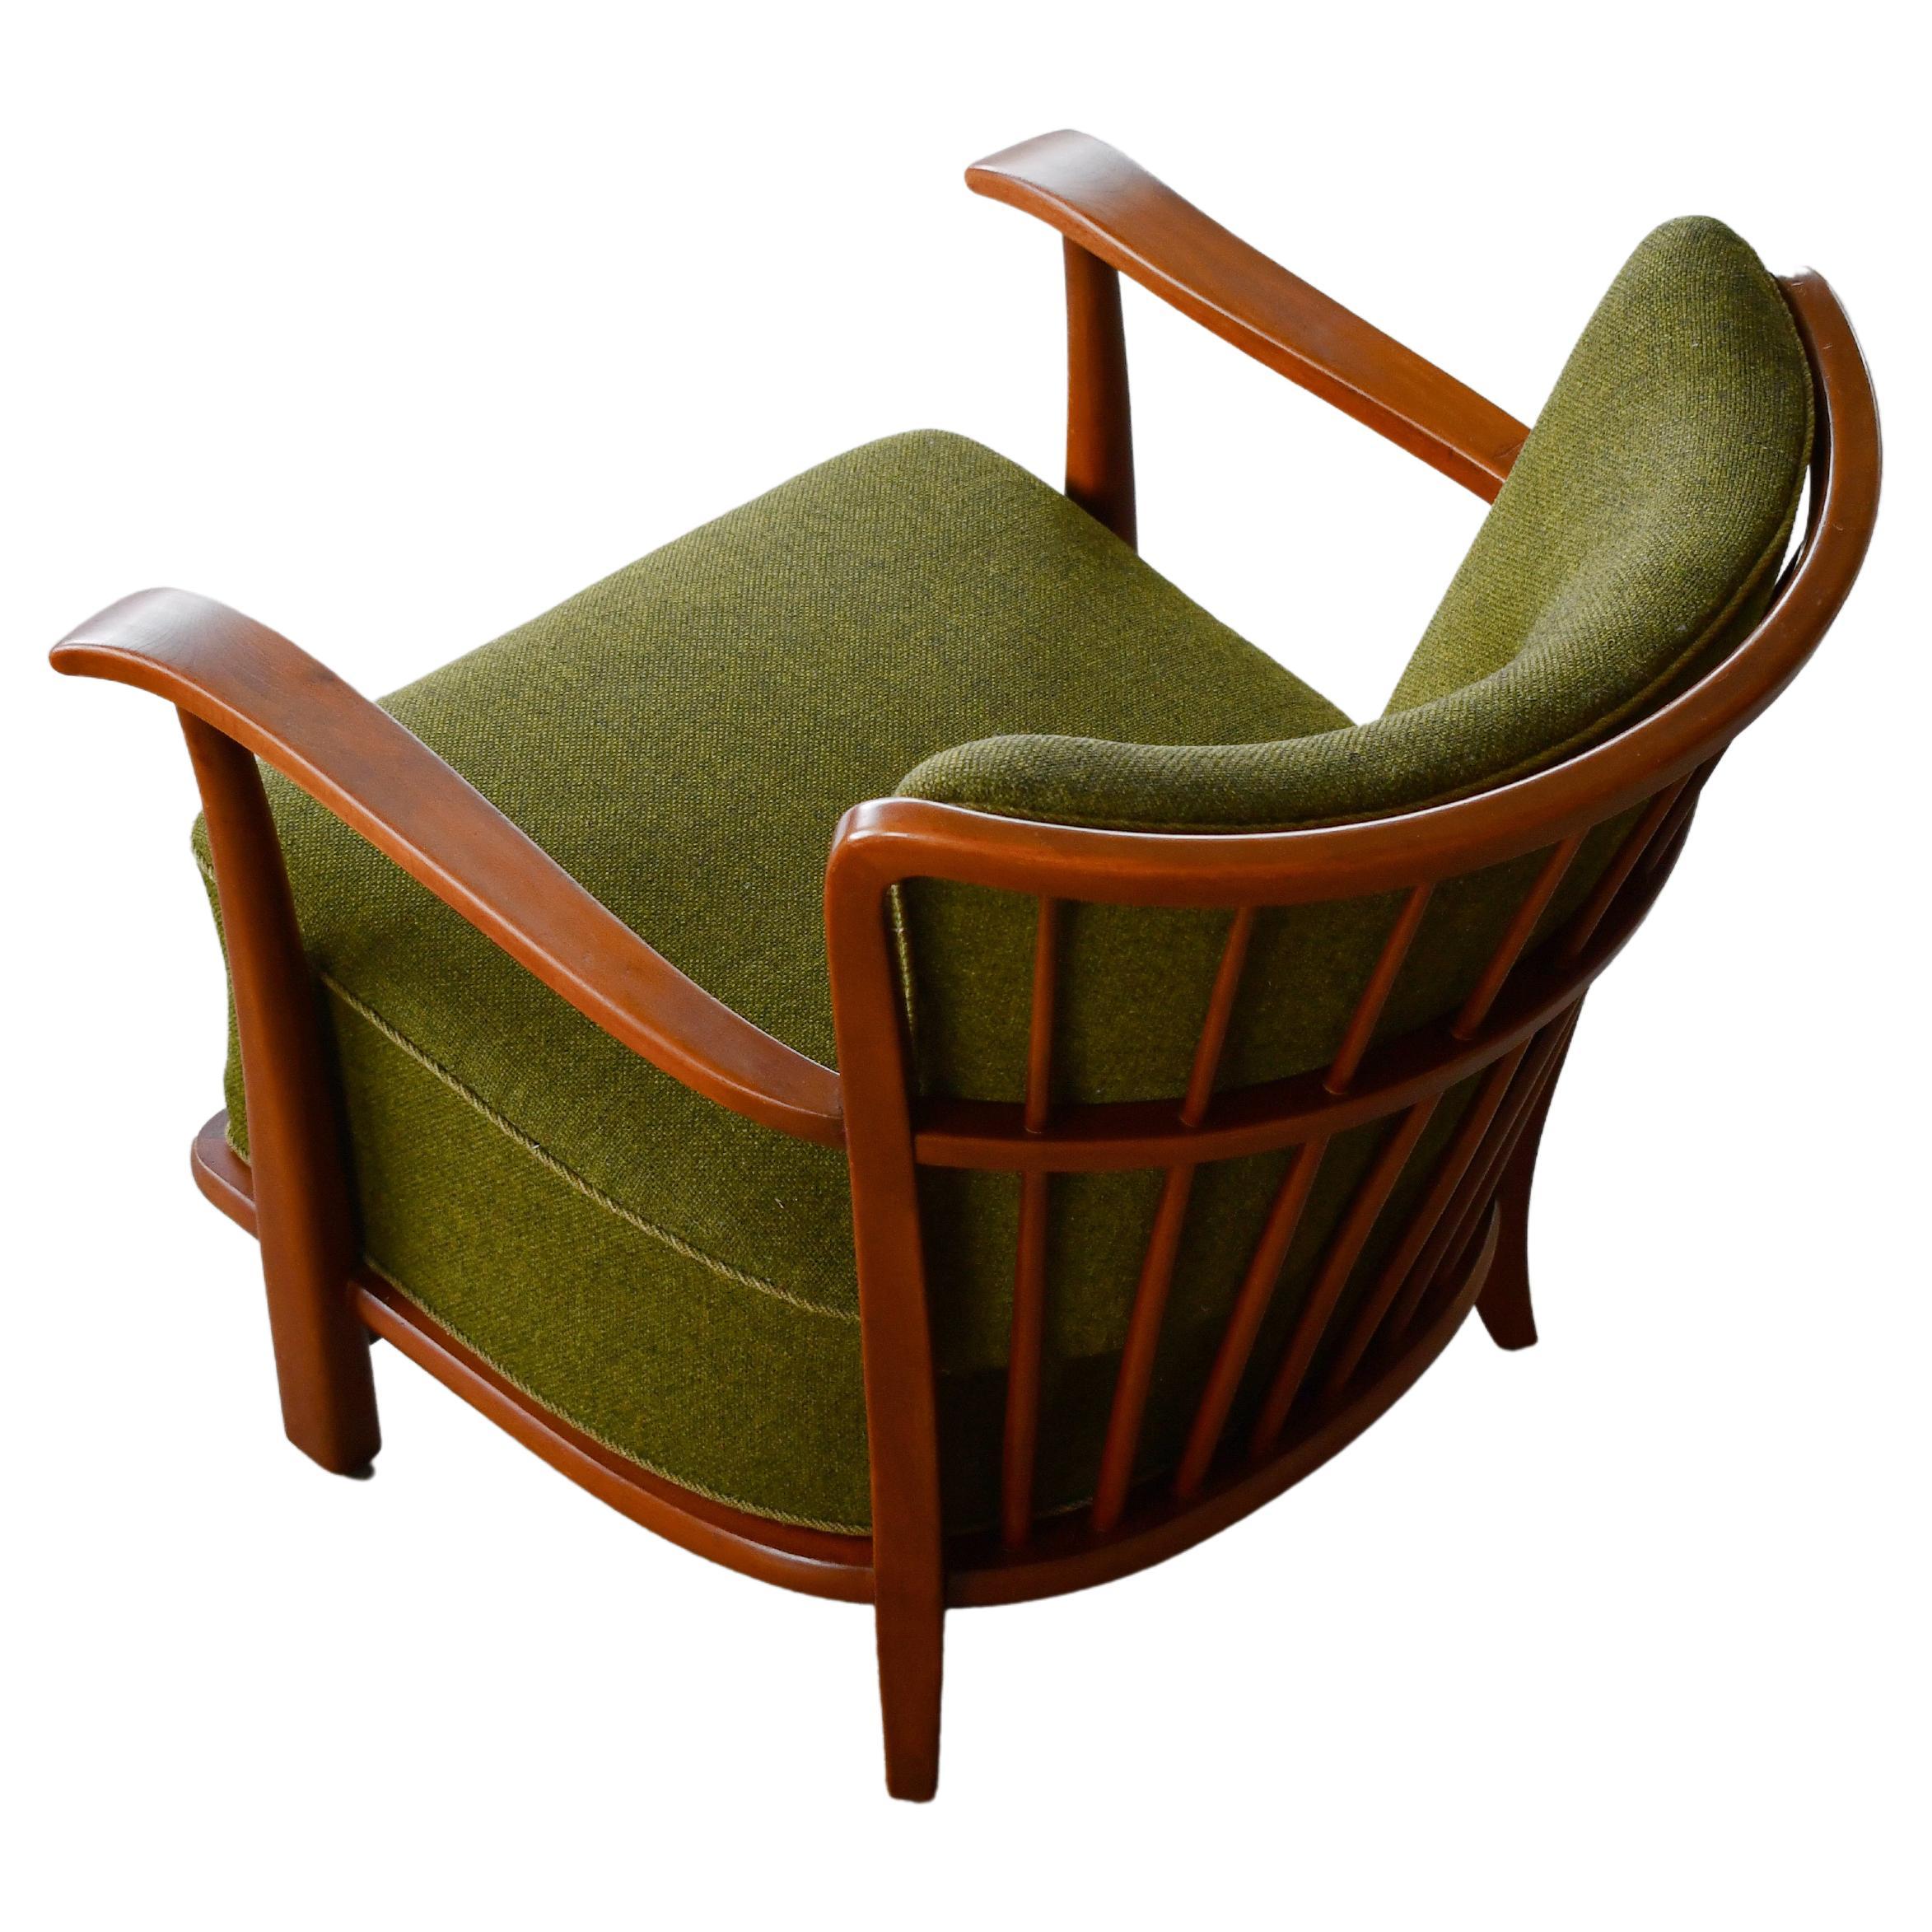 Spindle Back Lounge Chair by Frits Schlegel Model 1594 for Fritz Hansen, 1940s For Sale